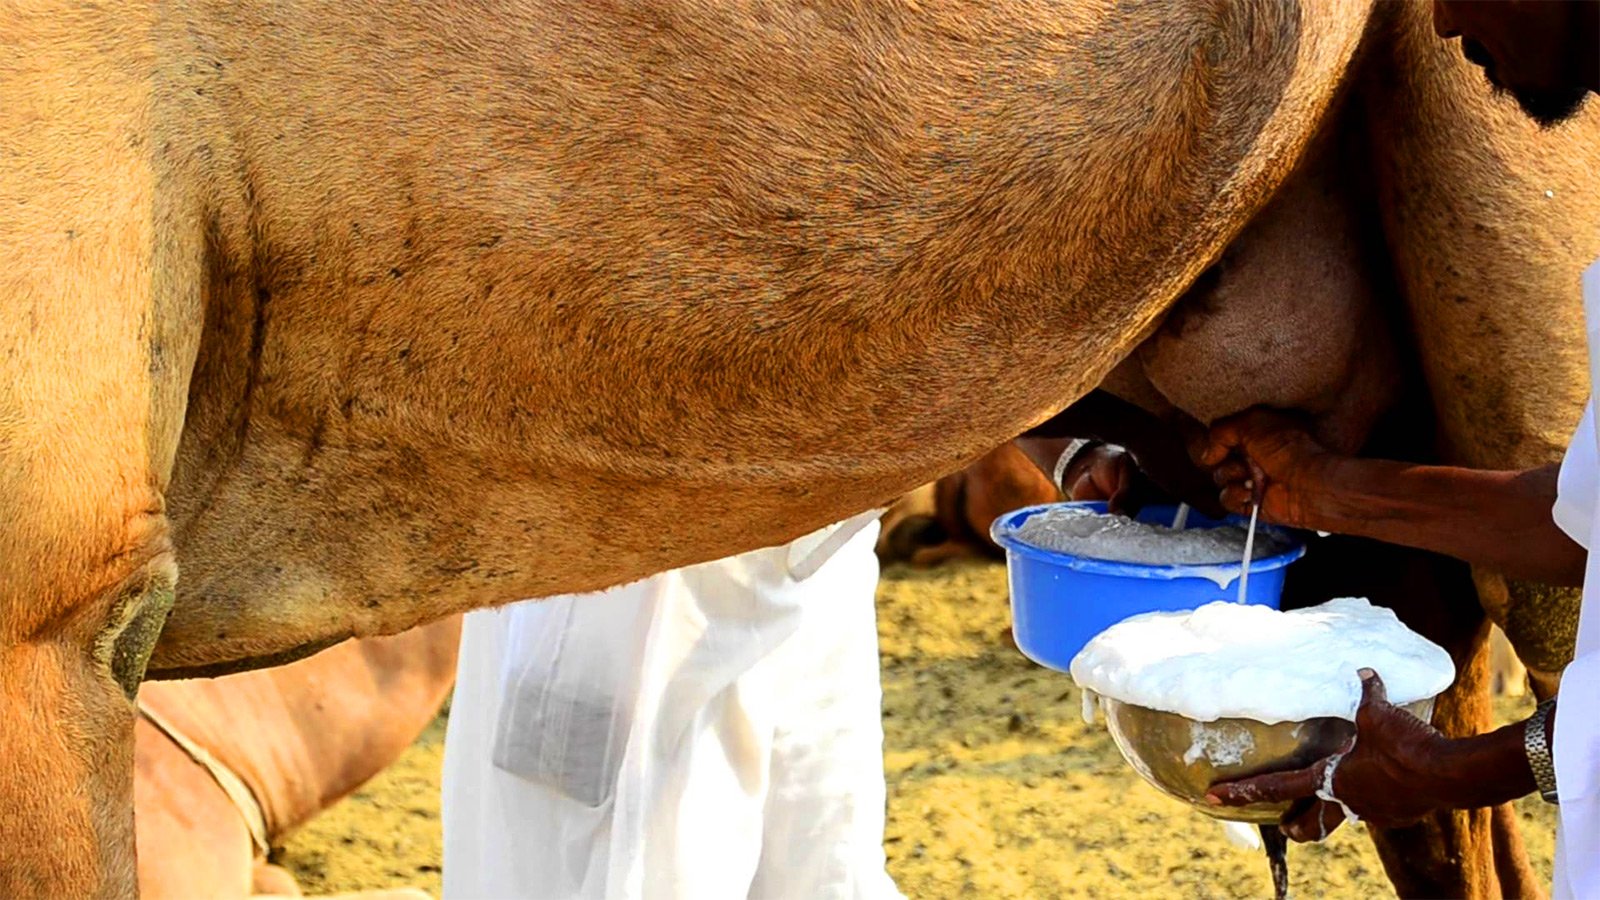 How to try fresh camel milk in Al Ain